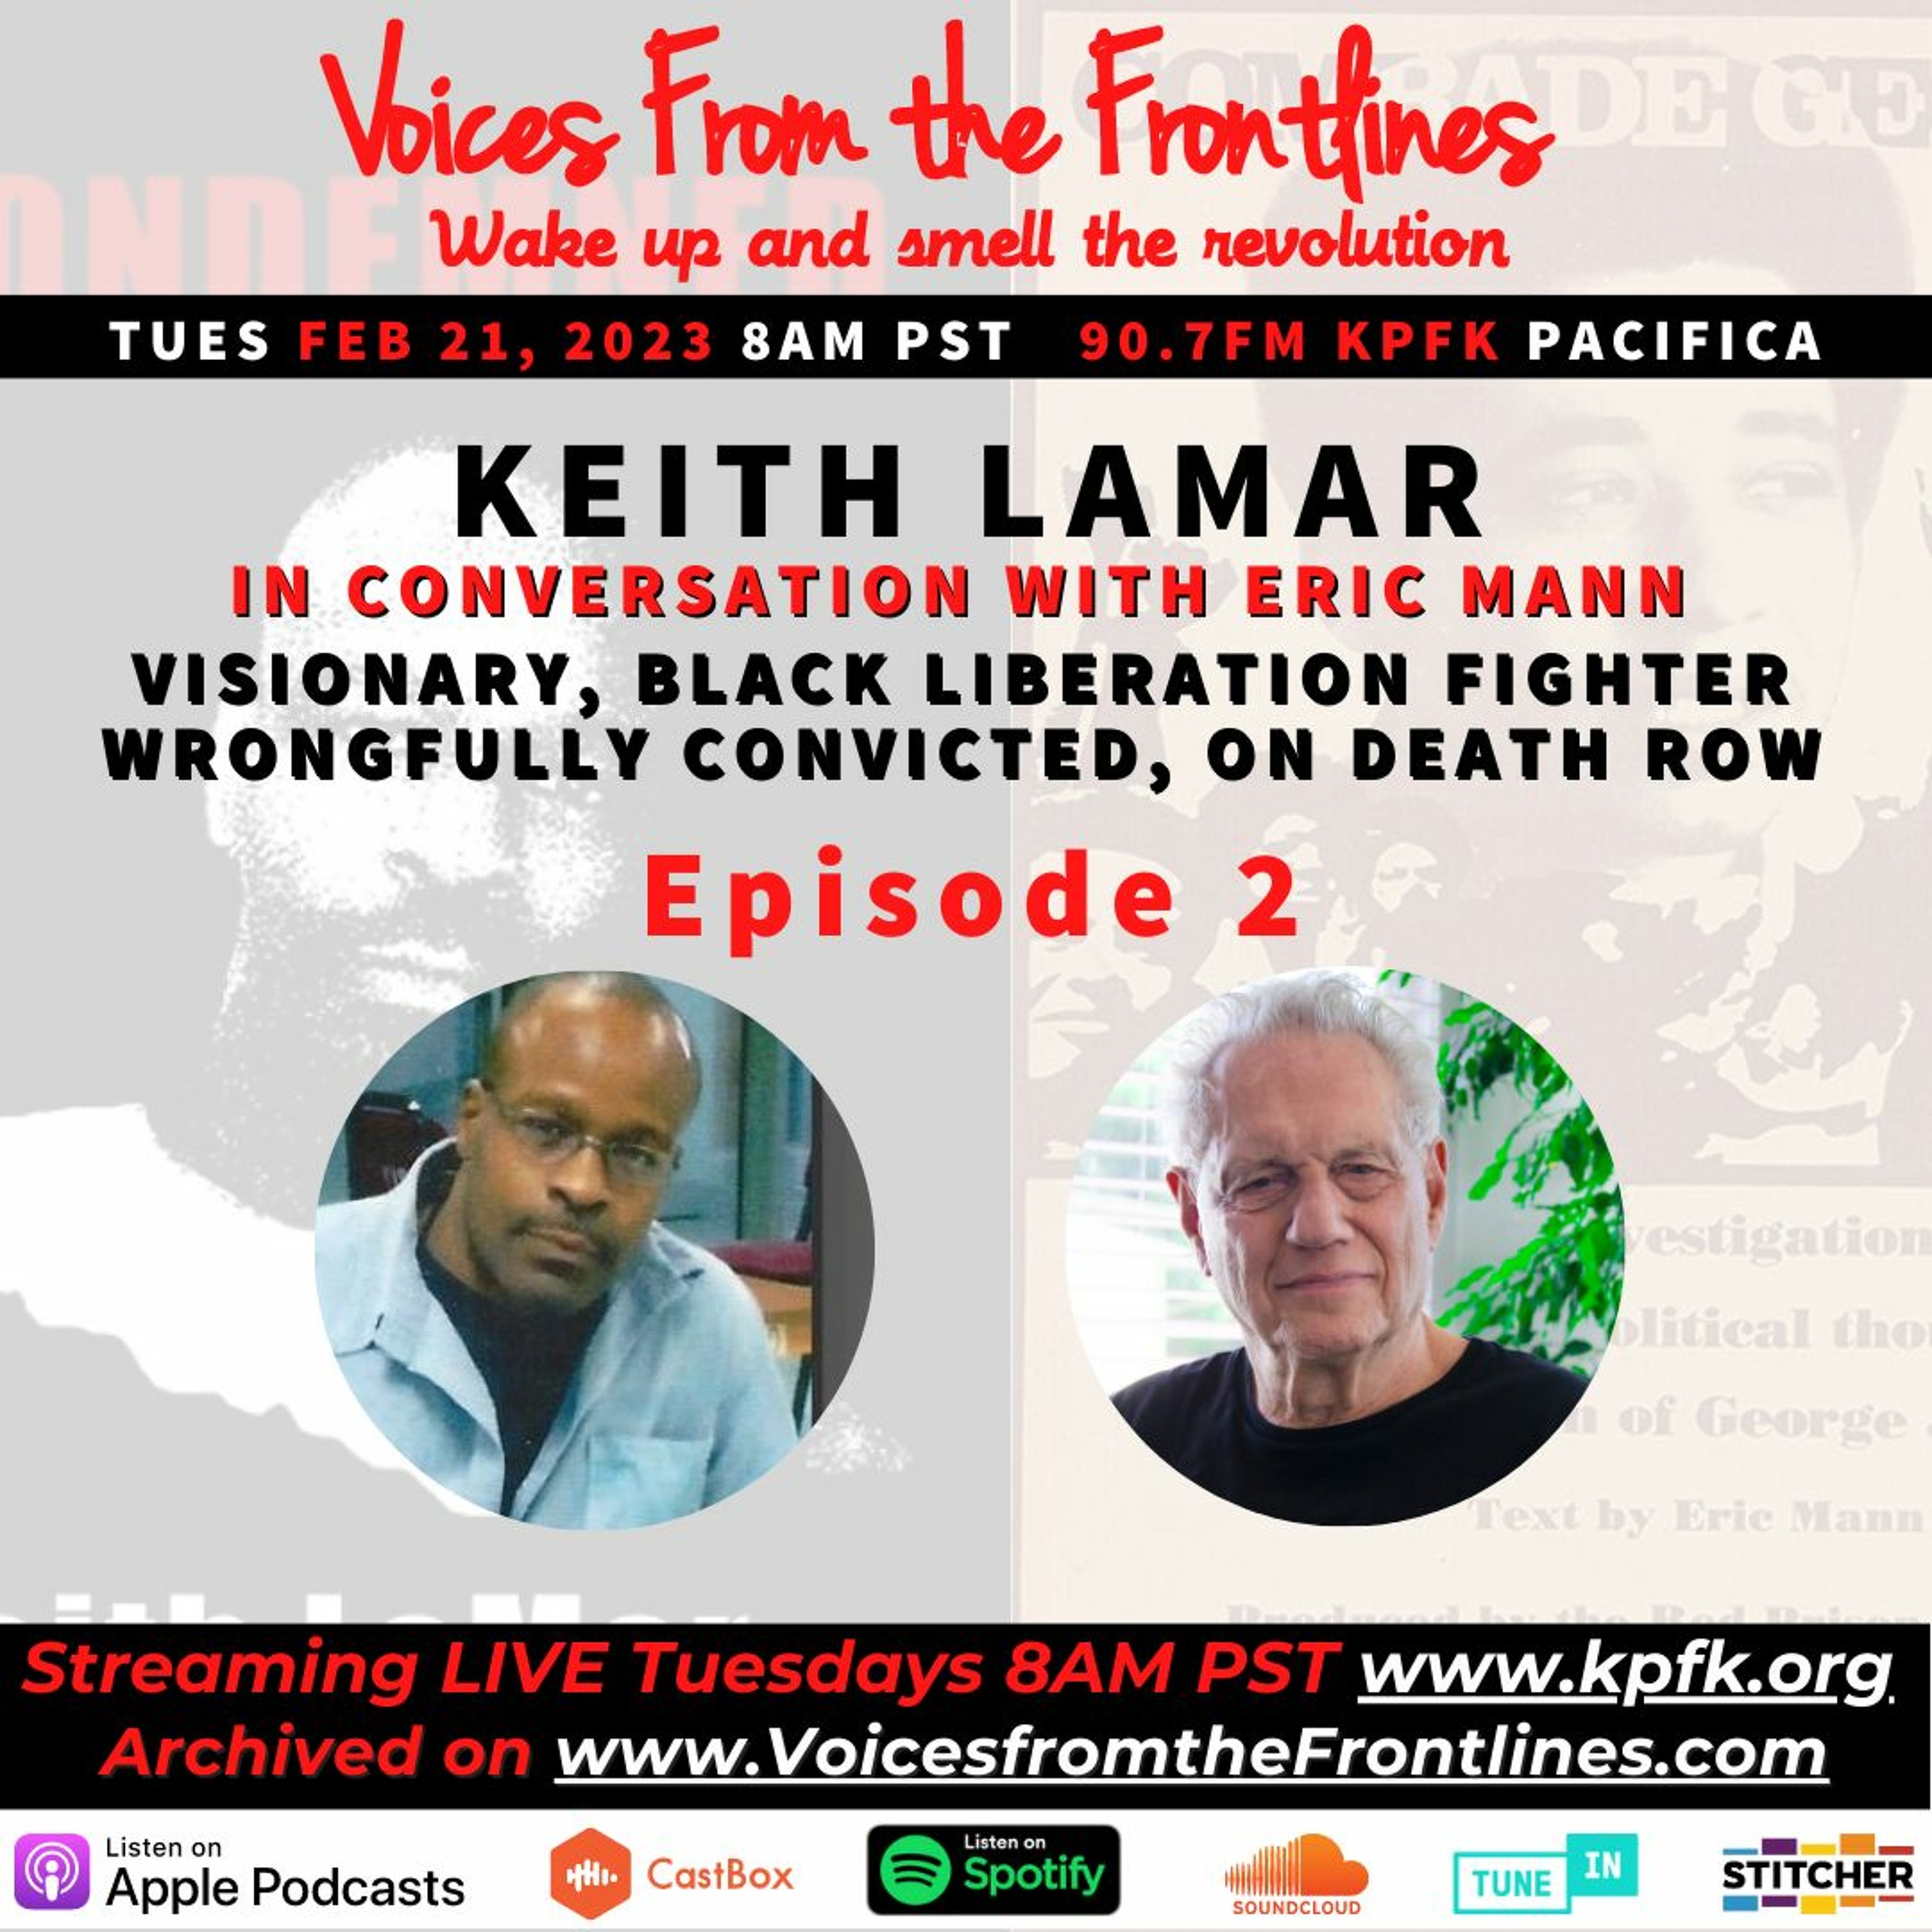 Keith Lamar in Conversation with Eric Mann